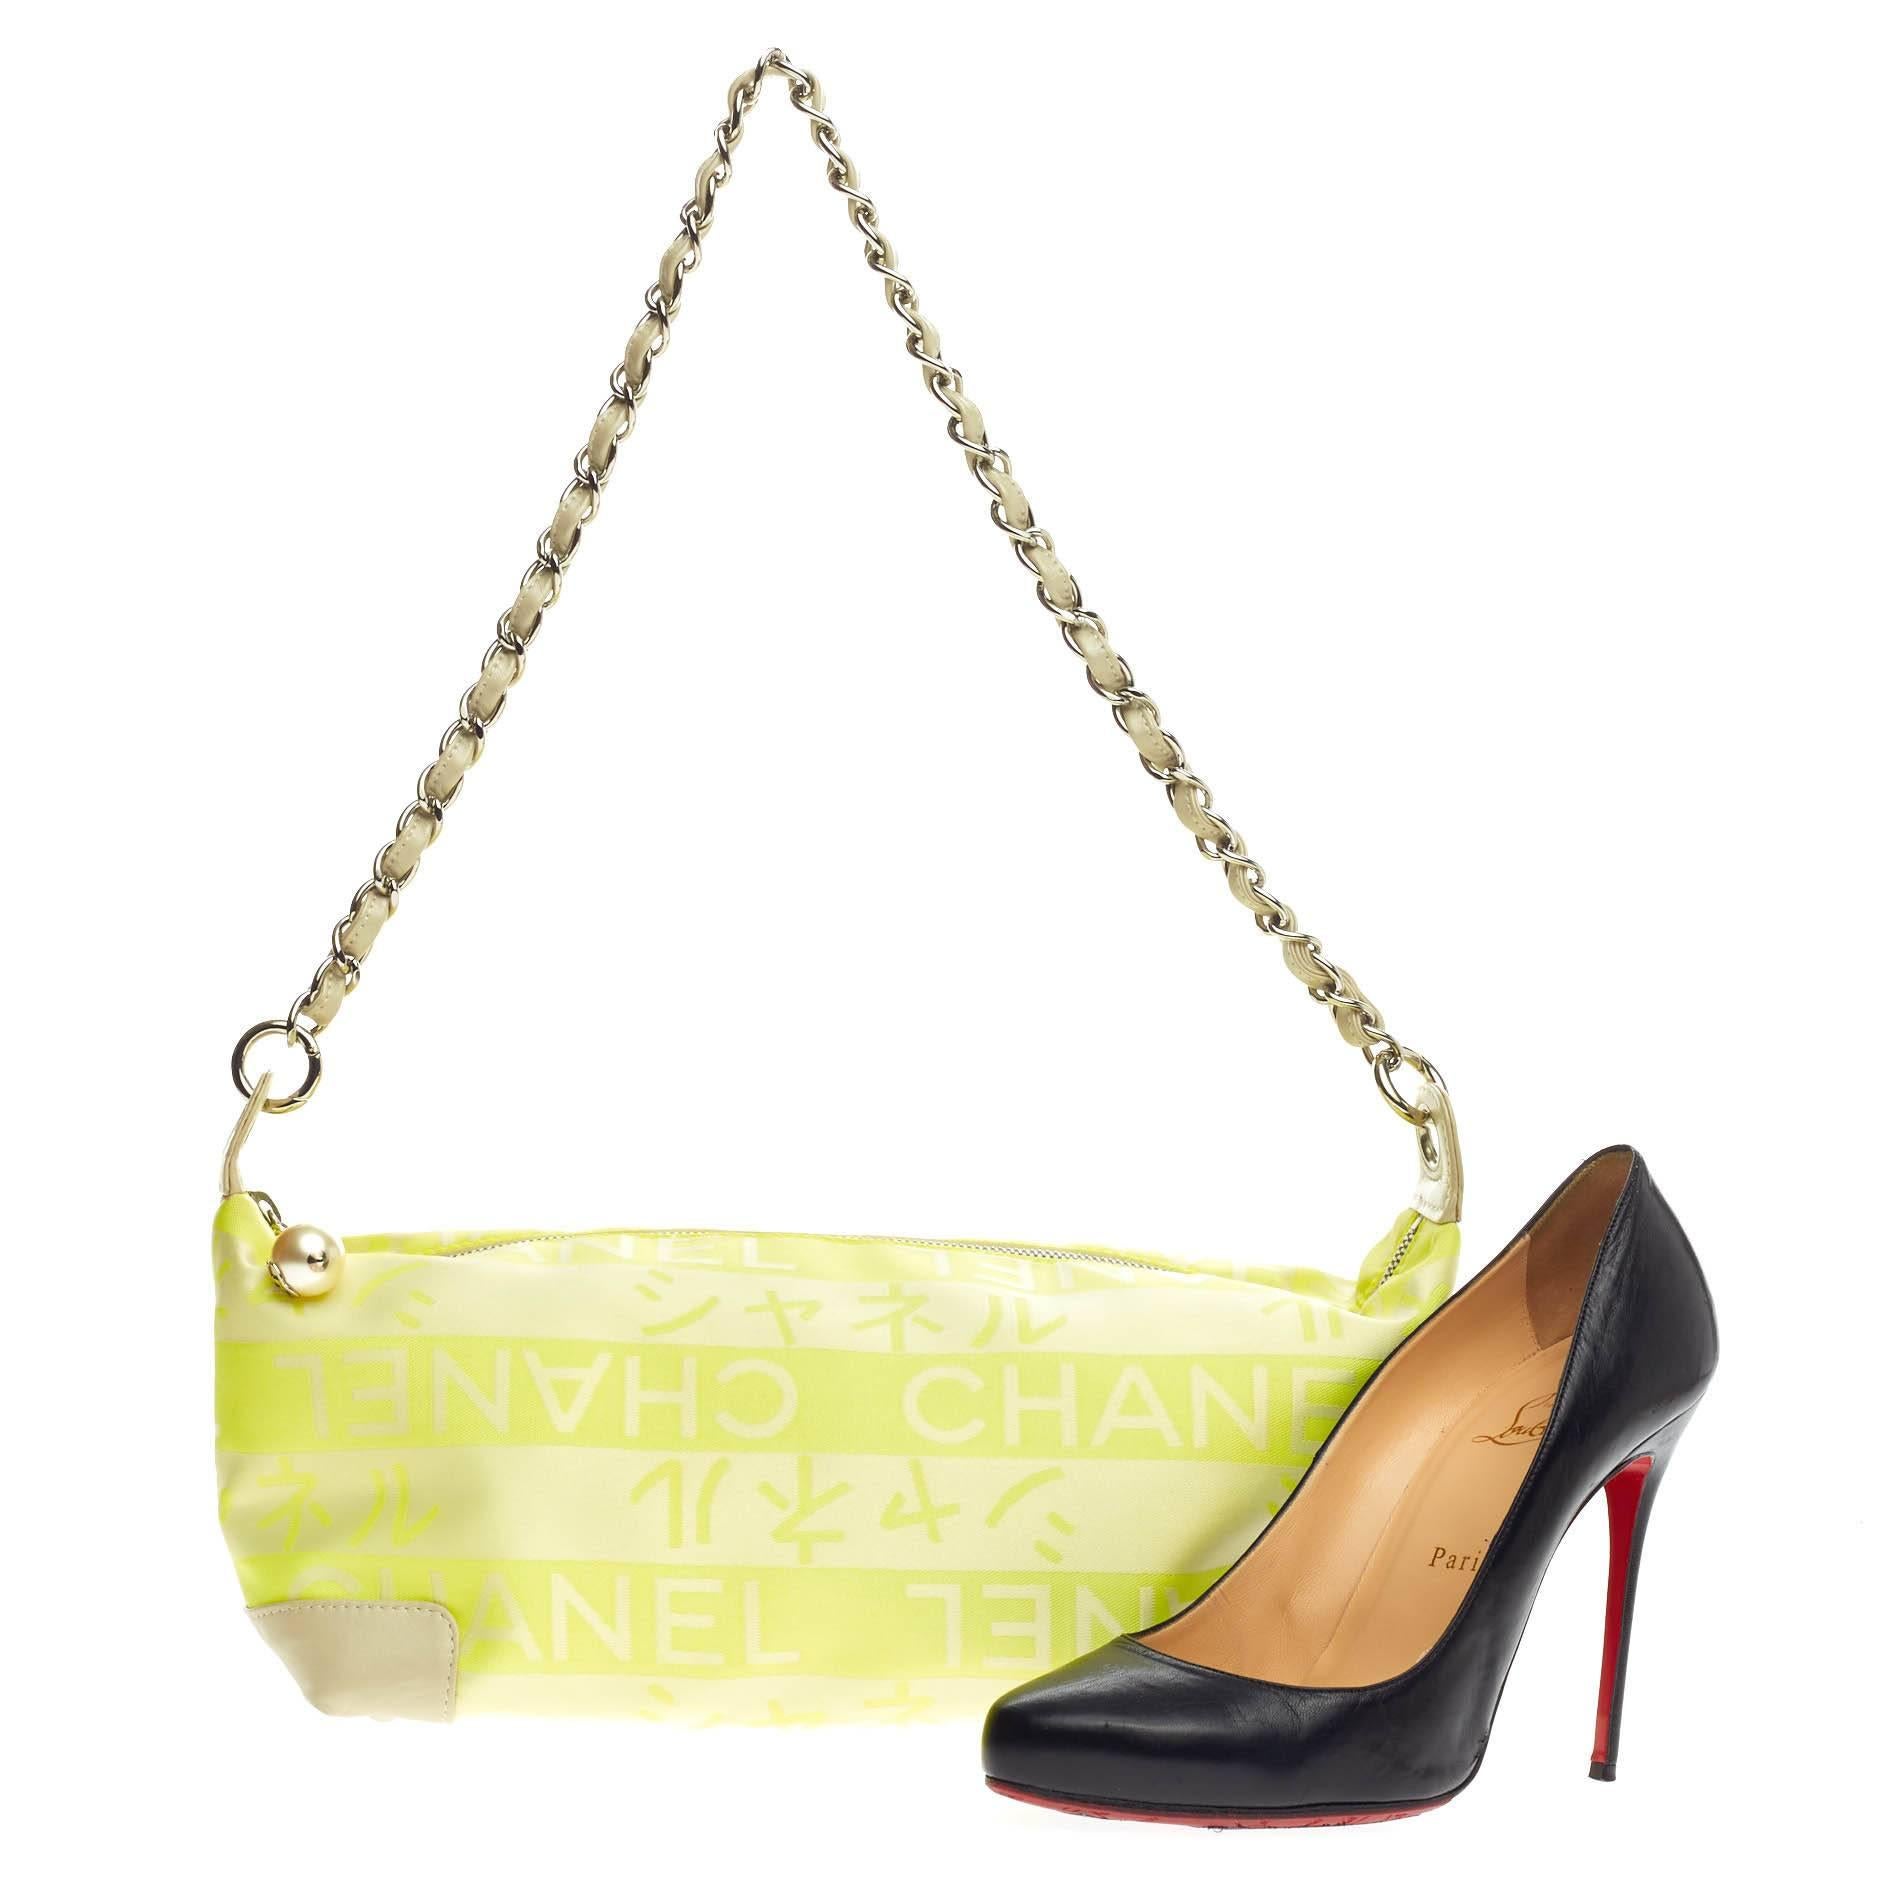 This authentic Chanel Pearl Charm Chain Shoulder Bag Printed Fabric Medium showcases a kitschy, casual design perfect for everyday use. Crafted from lime green fabric with beige leather trims, this shoulder bag features a stand-out Japanese